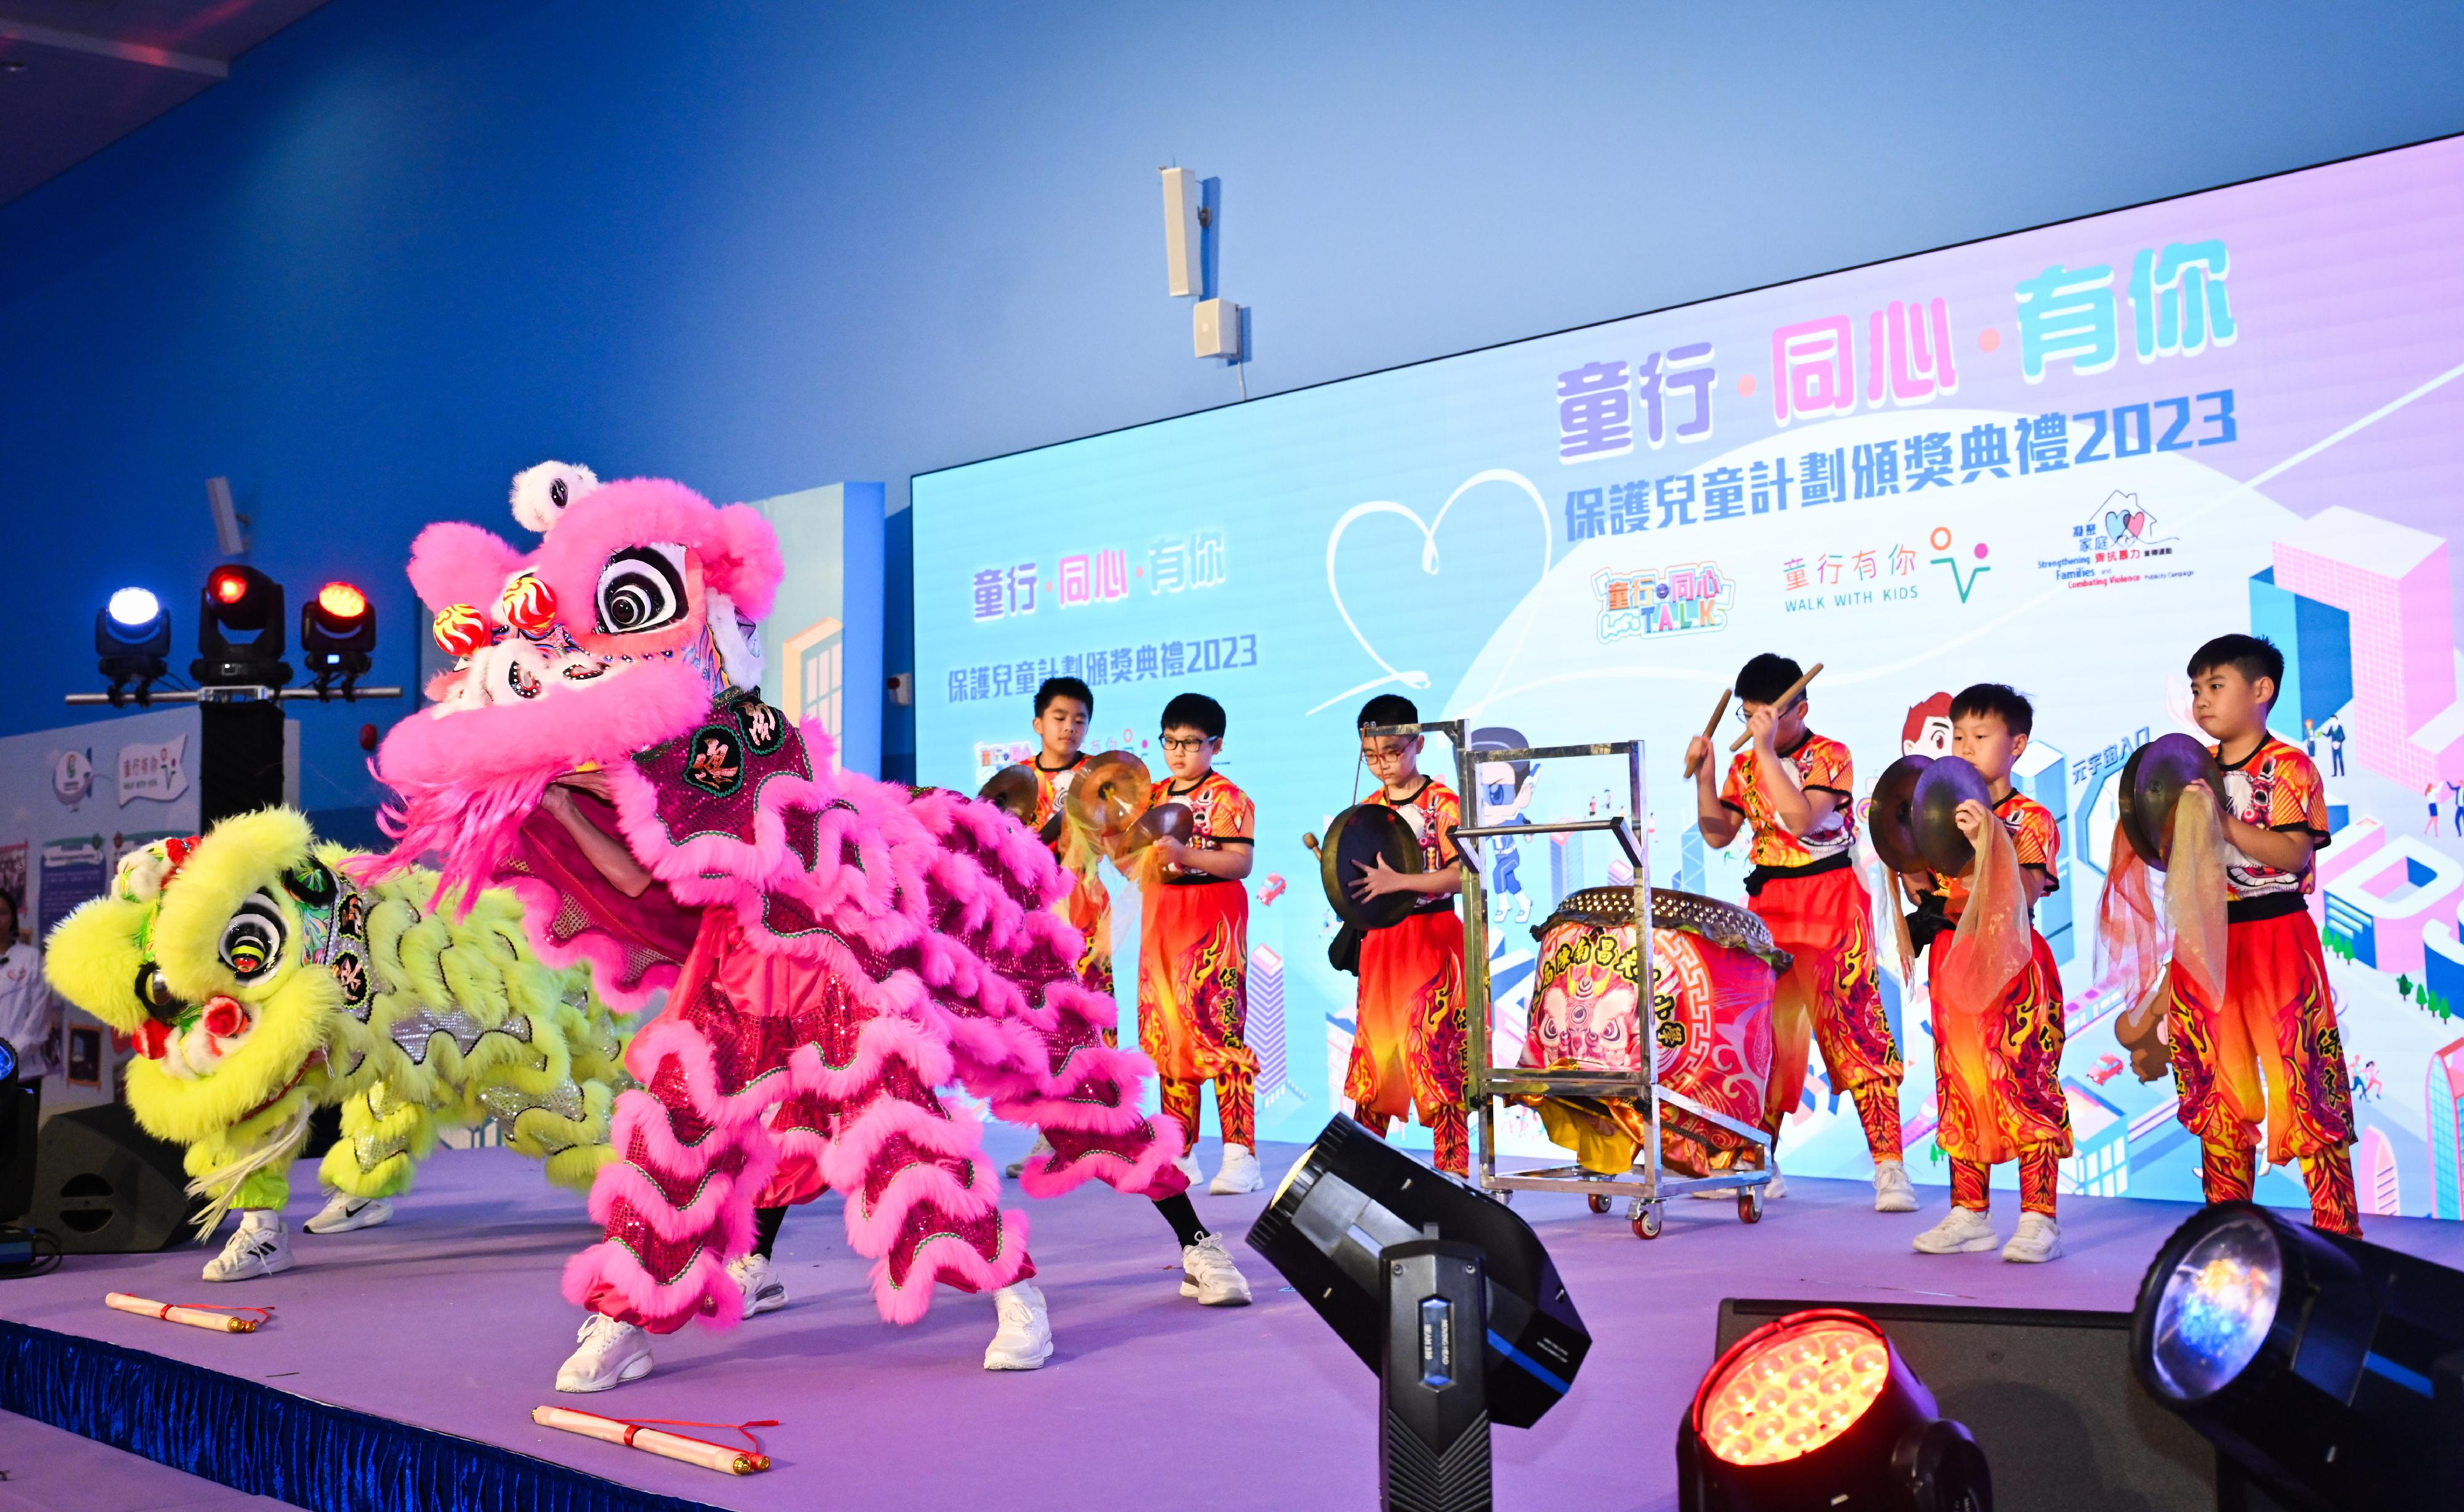 The Chief Secretary for Administration and Chairperson of the Commission on Children, Mr Chan Kwok-ki, today (November 18) officiated at the "Let's T.A.L.K. and Walk with Kids" Child Protection Campaign Award Presentation Ceremony 2023. Photo shows lion dance performance by children.